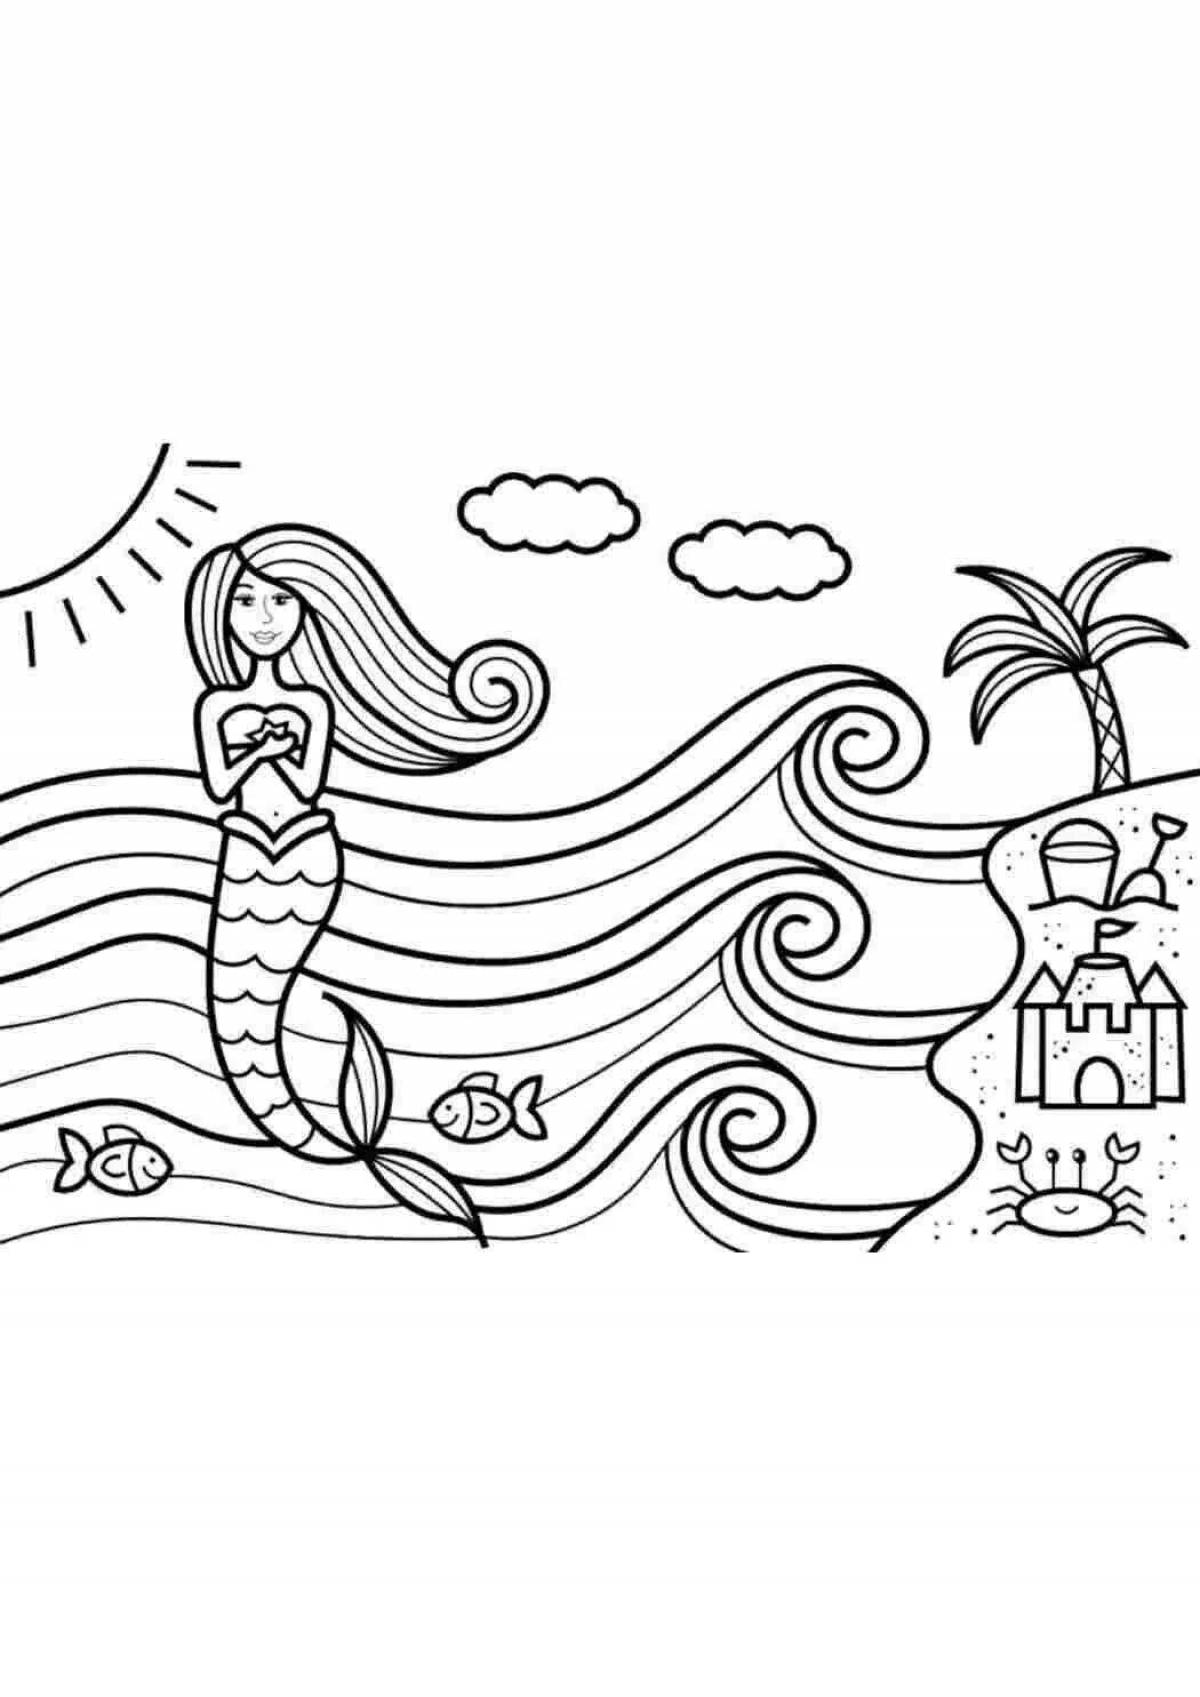 Playful coloring book for children 6-7 years old